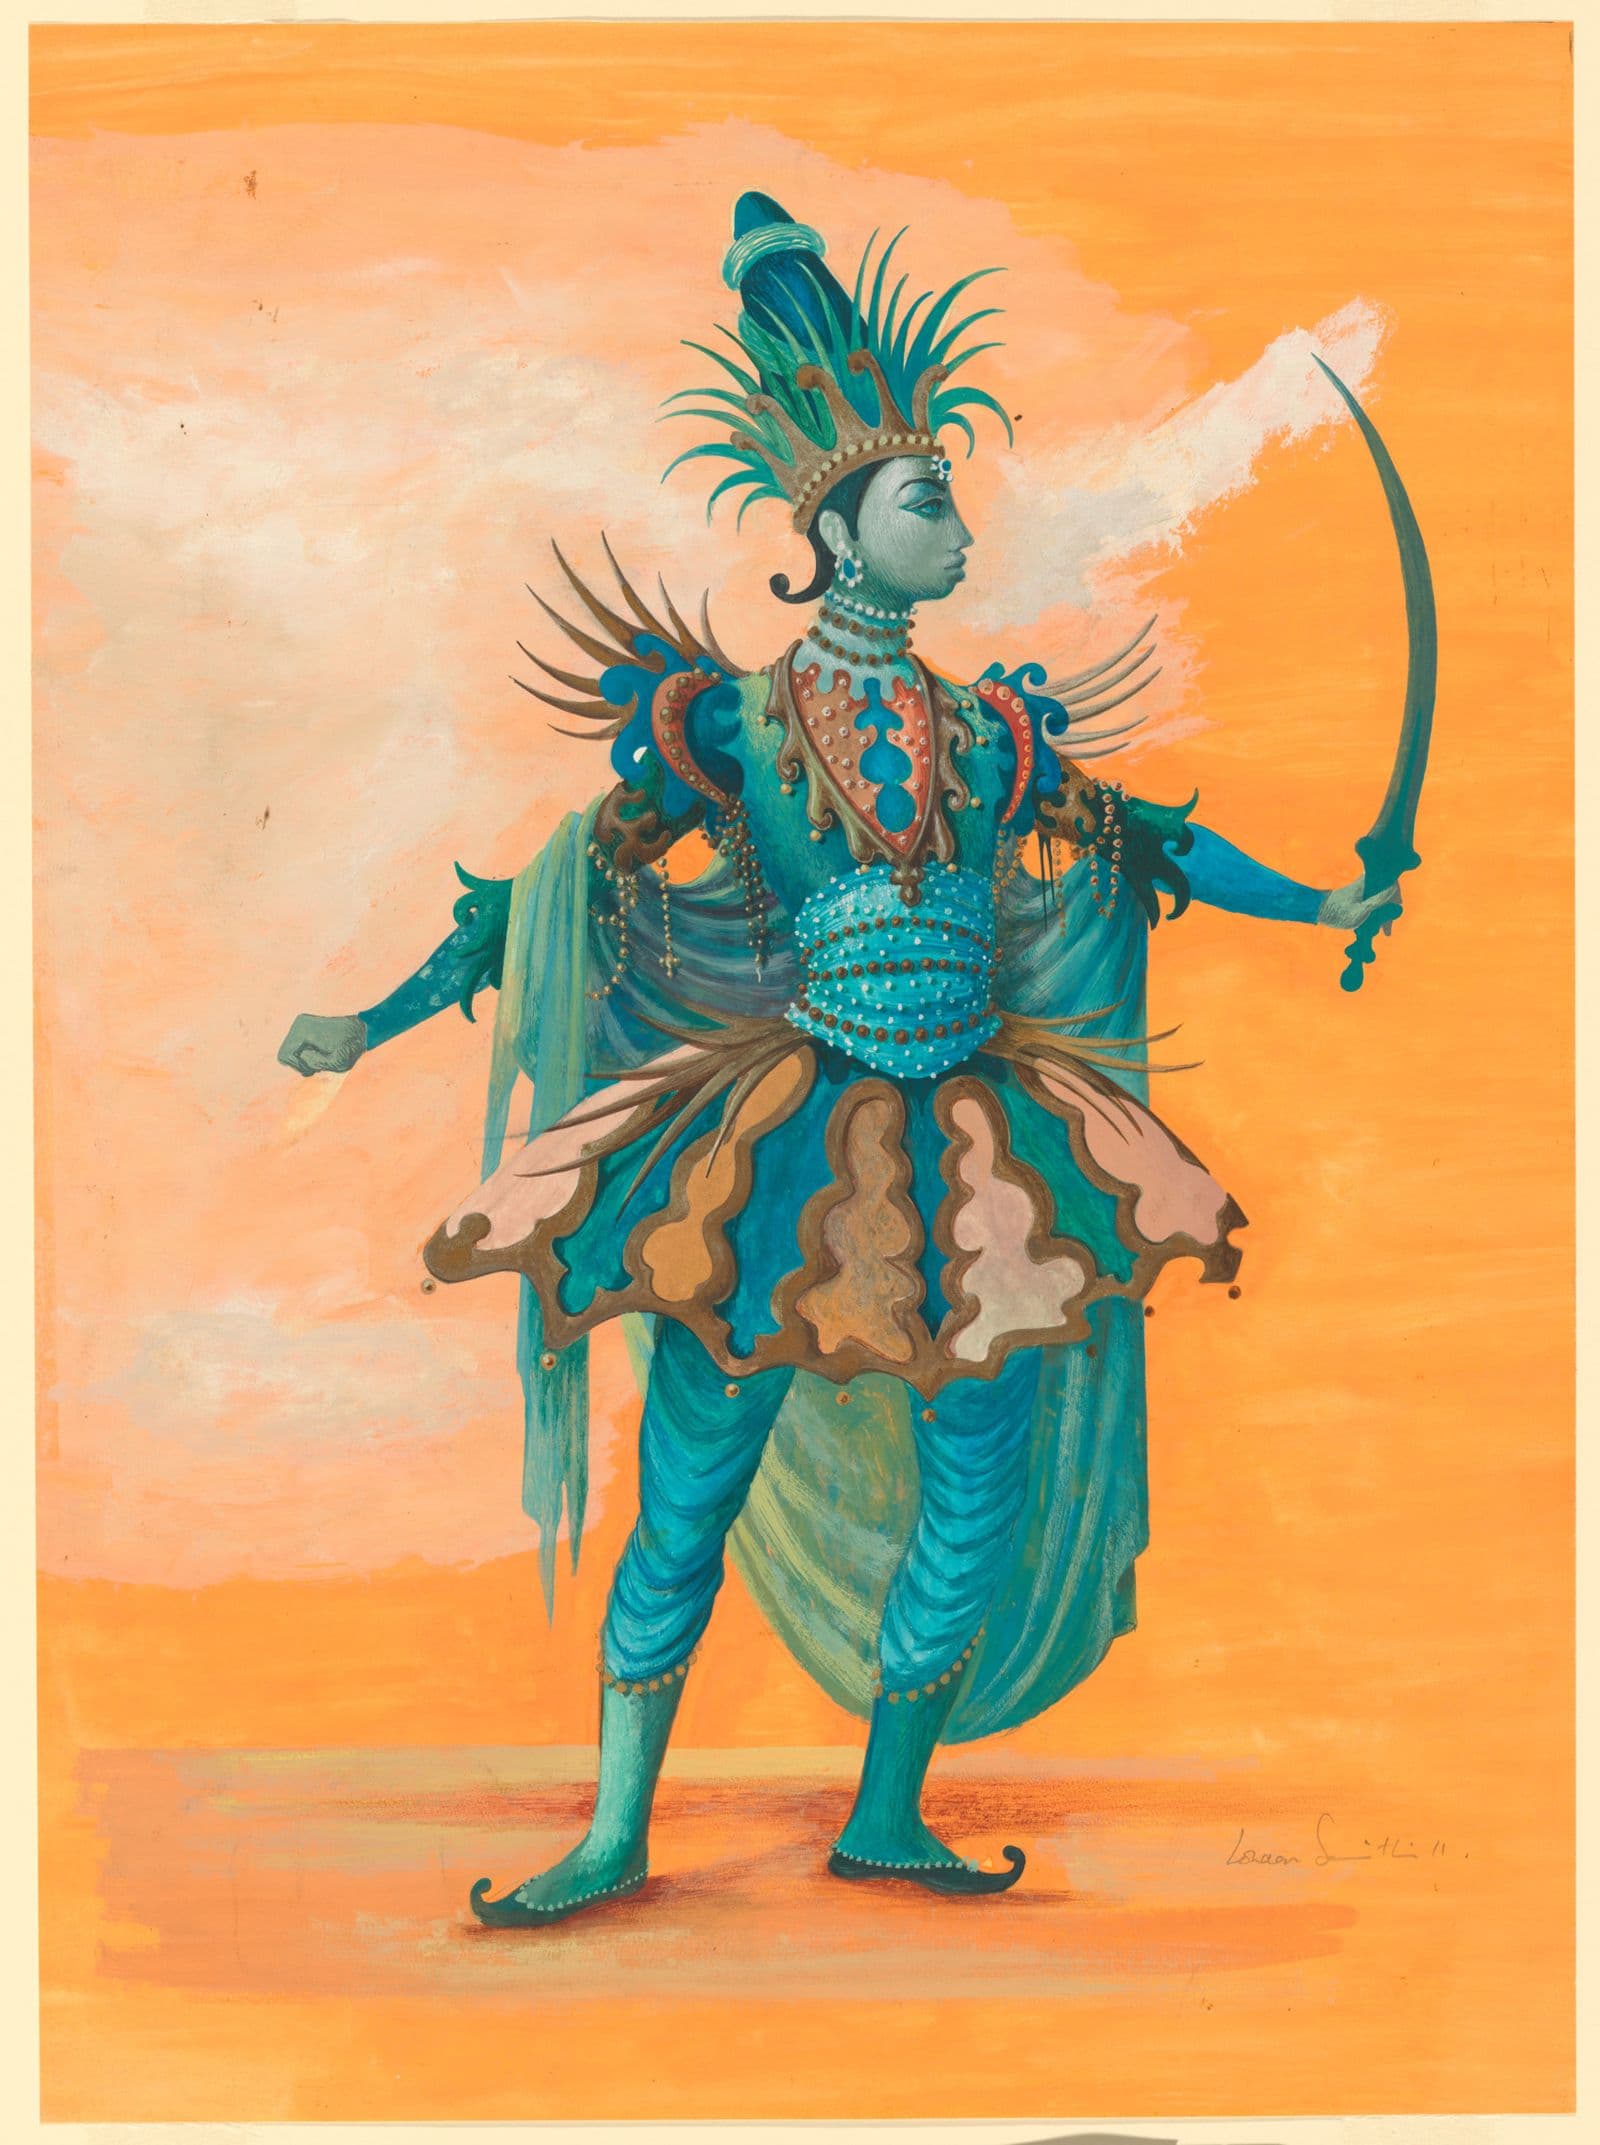 Elaborate costume design, inspired by Indian court attire. Blue in colour upon an orange background